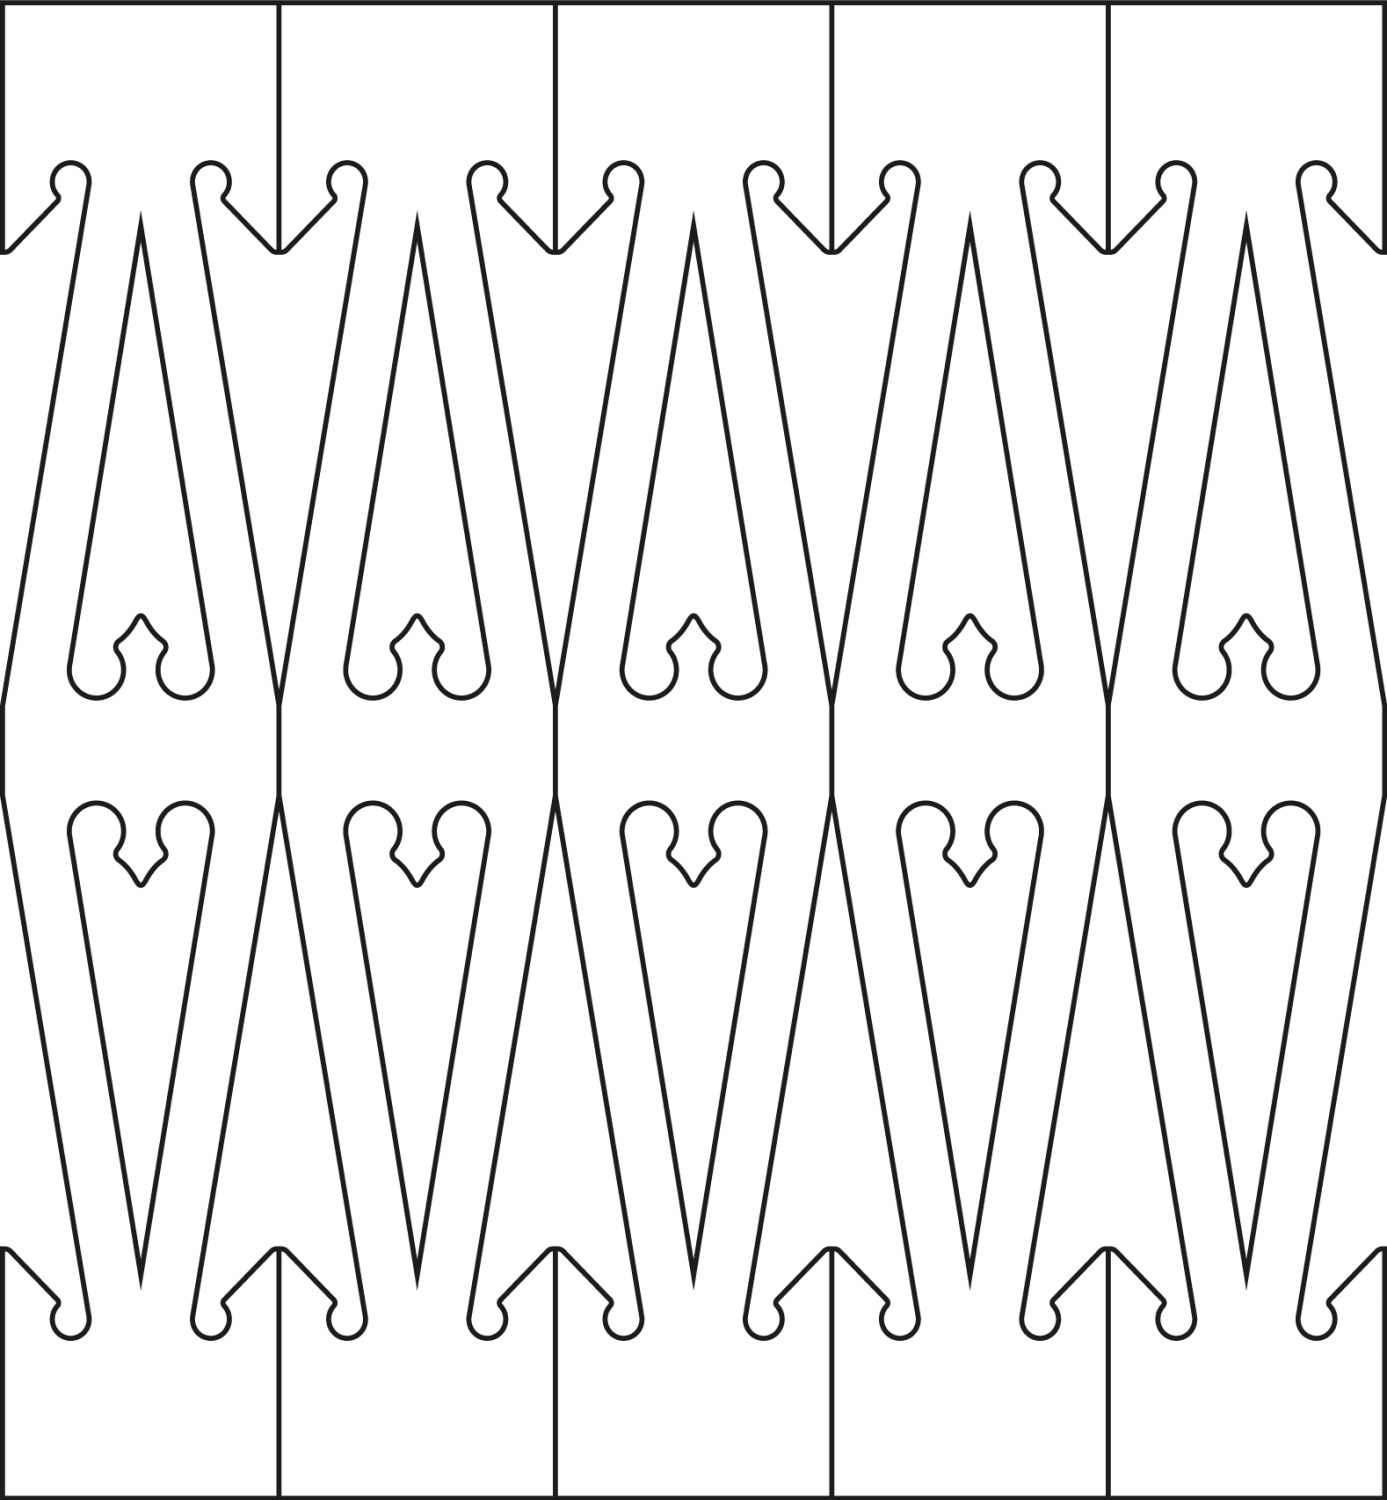 Baluster 027 - The drawing shows 5 Decorative victorian sawn balusters & pickets together